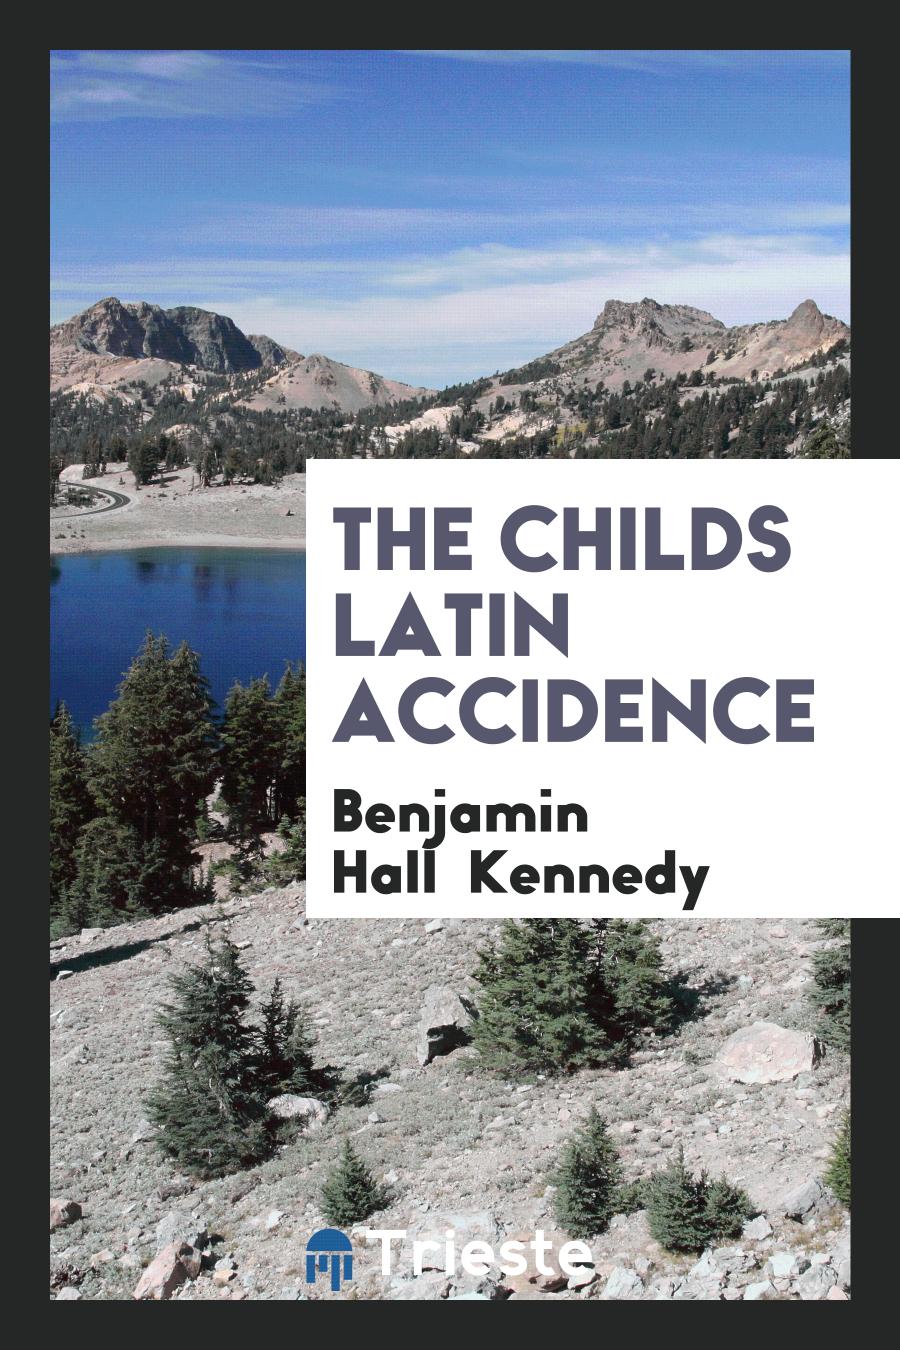 The childs latin accidence